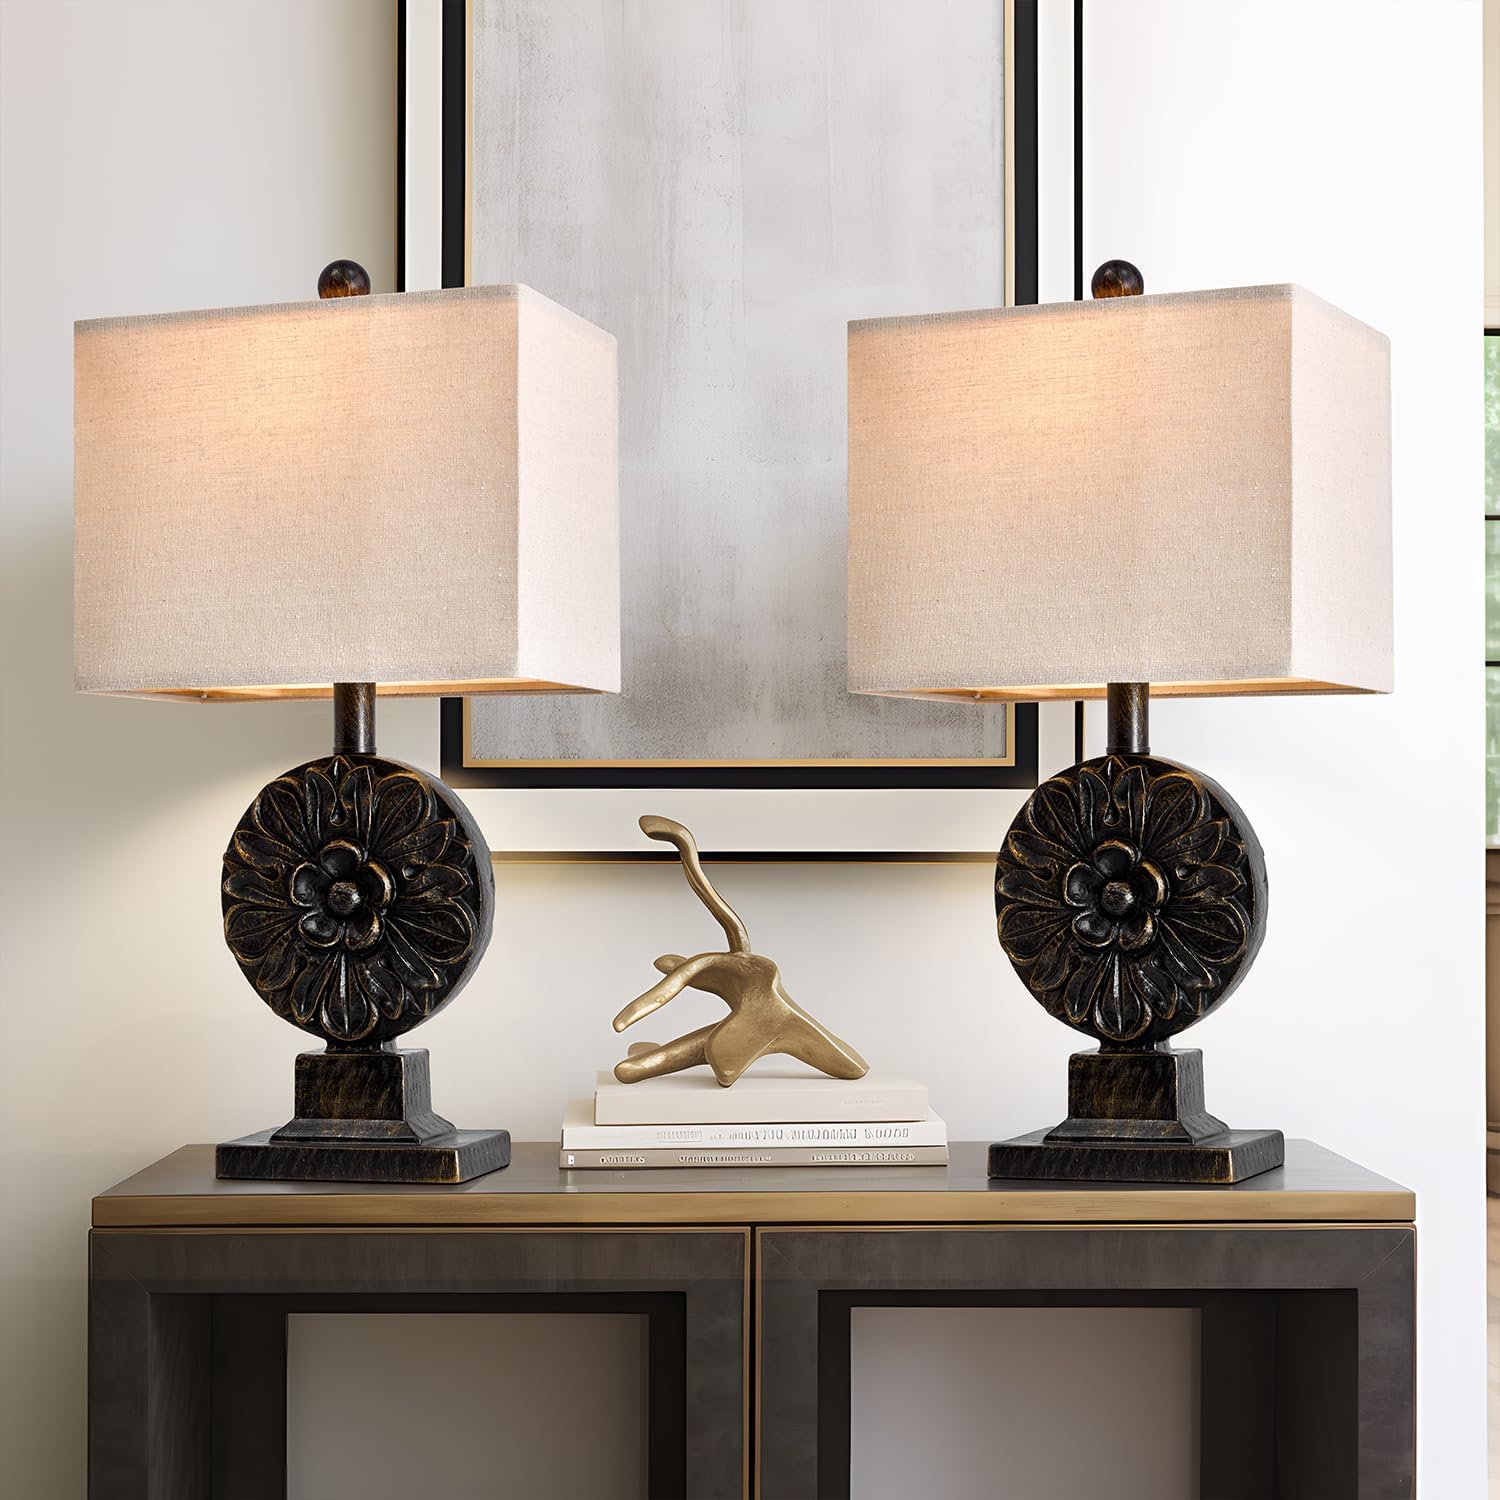 These lamps are so nice and well made . The size is good for living room or bedroom. The style is so pretty and has so great detail . These lamps look high-end but are priced for the budget minded shopper .